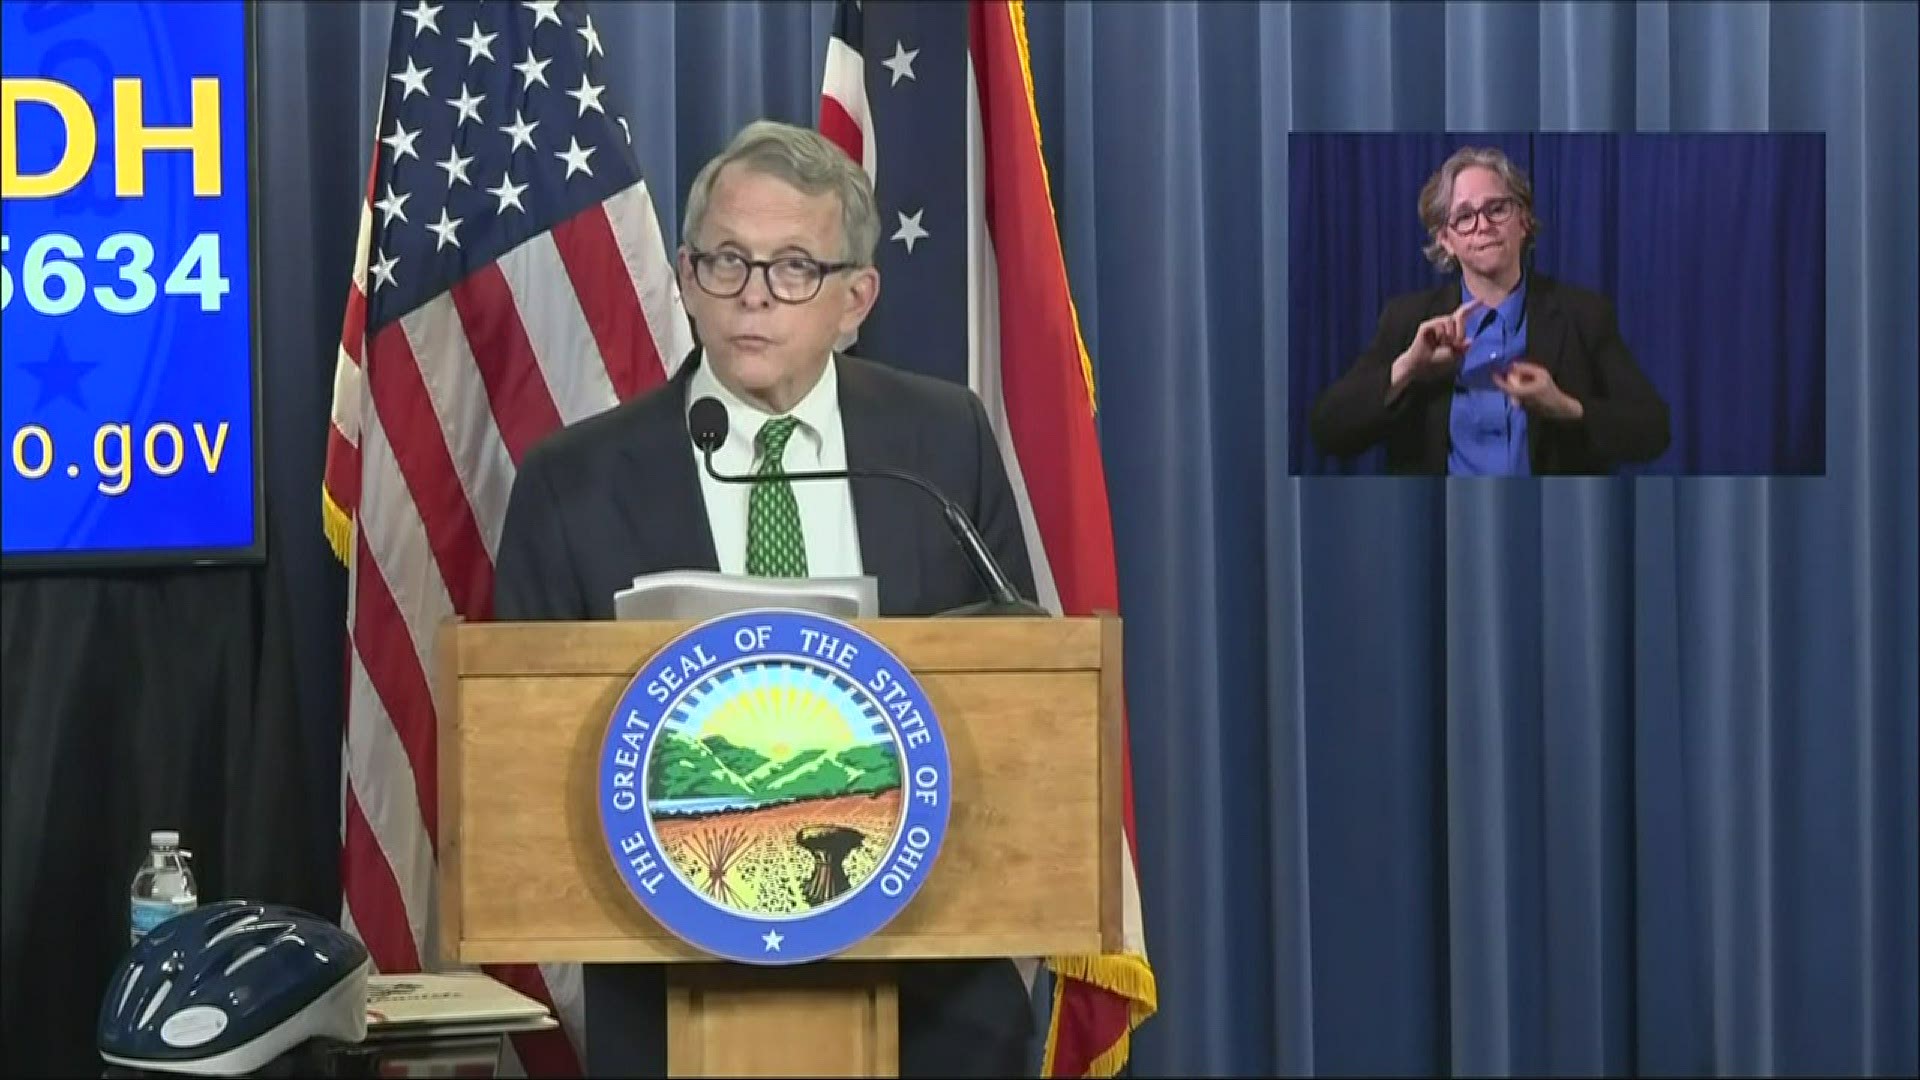 Decisions on whether county fairs go forward will be made locally, DeWine said. The Ohio State Fair for 2020 is canceled, however.